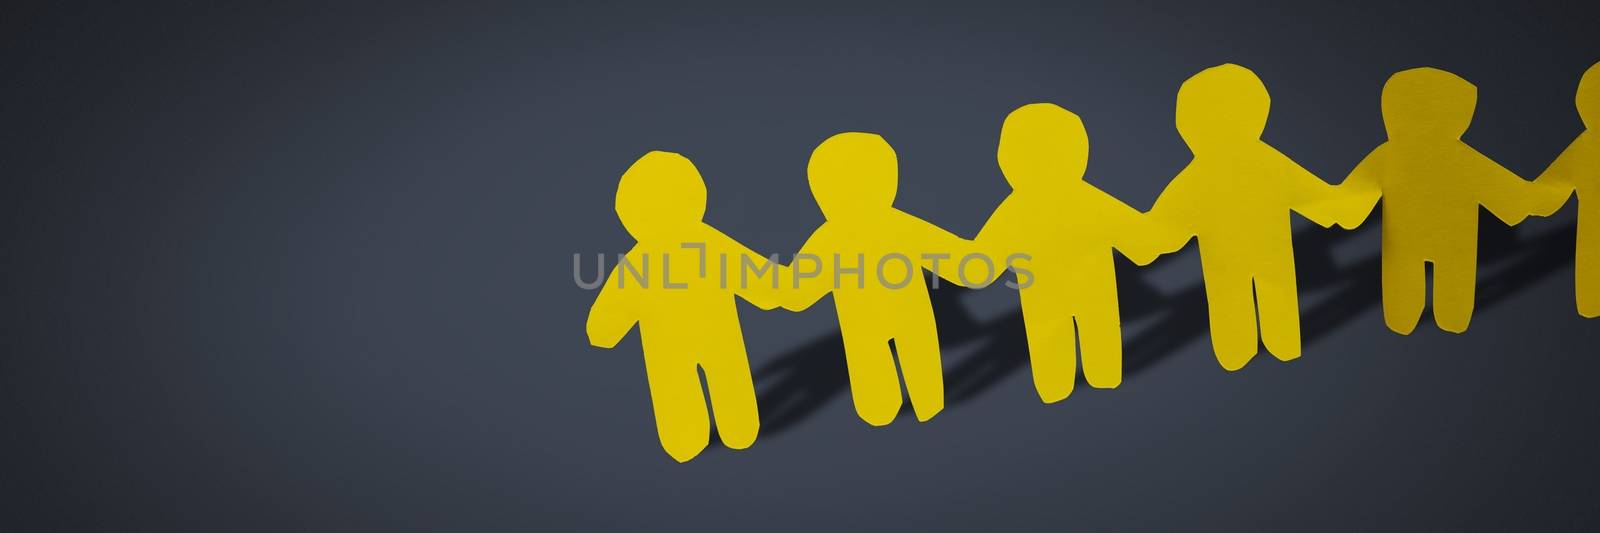 Paper cut out people holding hands together in line by Wavebreakmedia